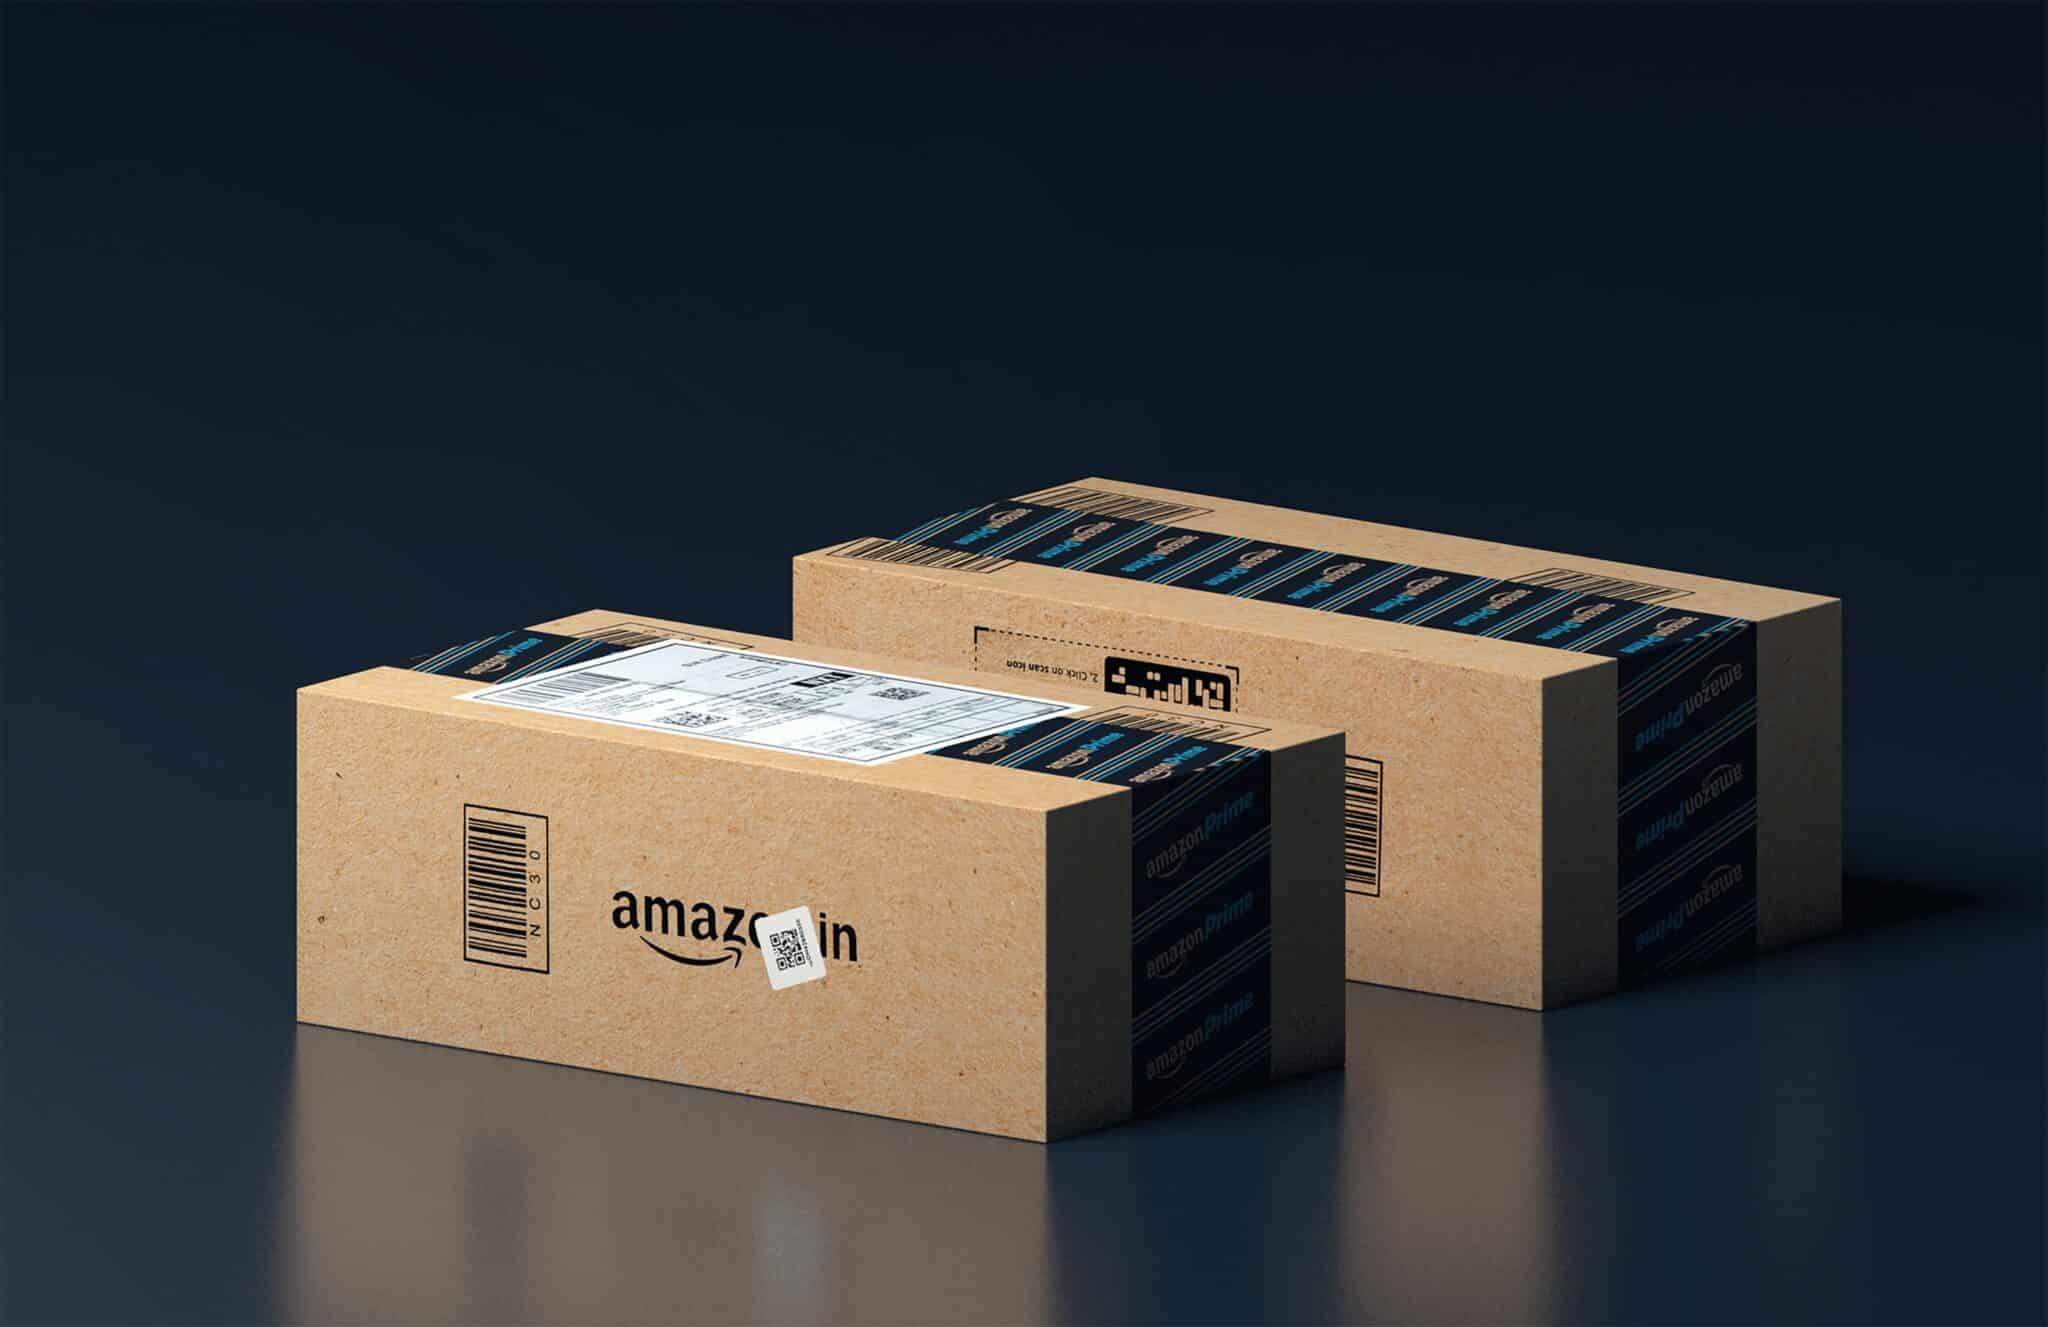 Prime Day order fulfillment options